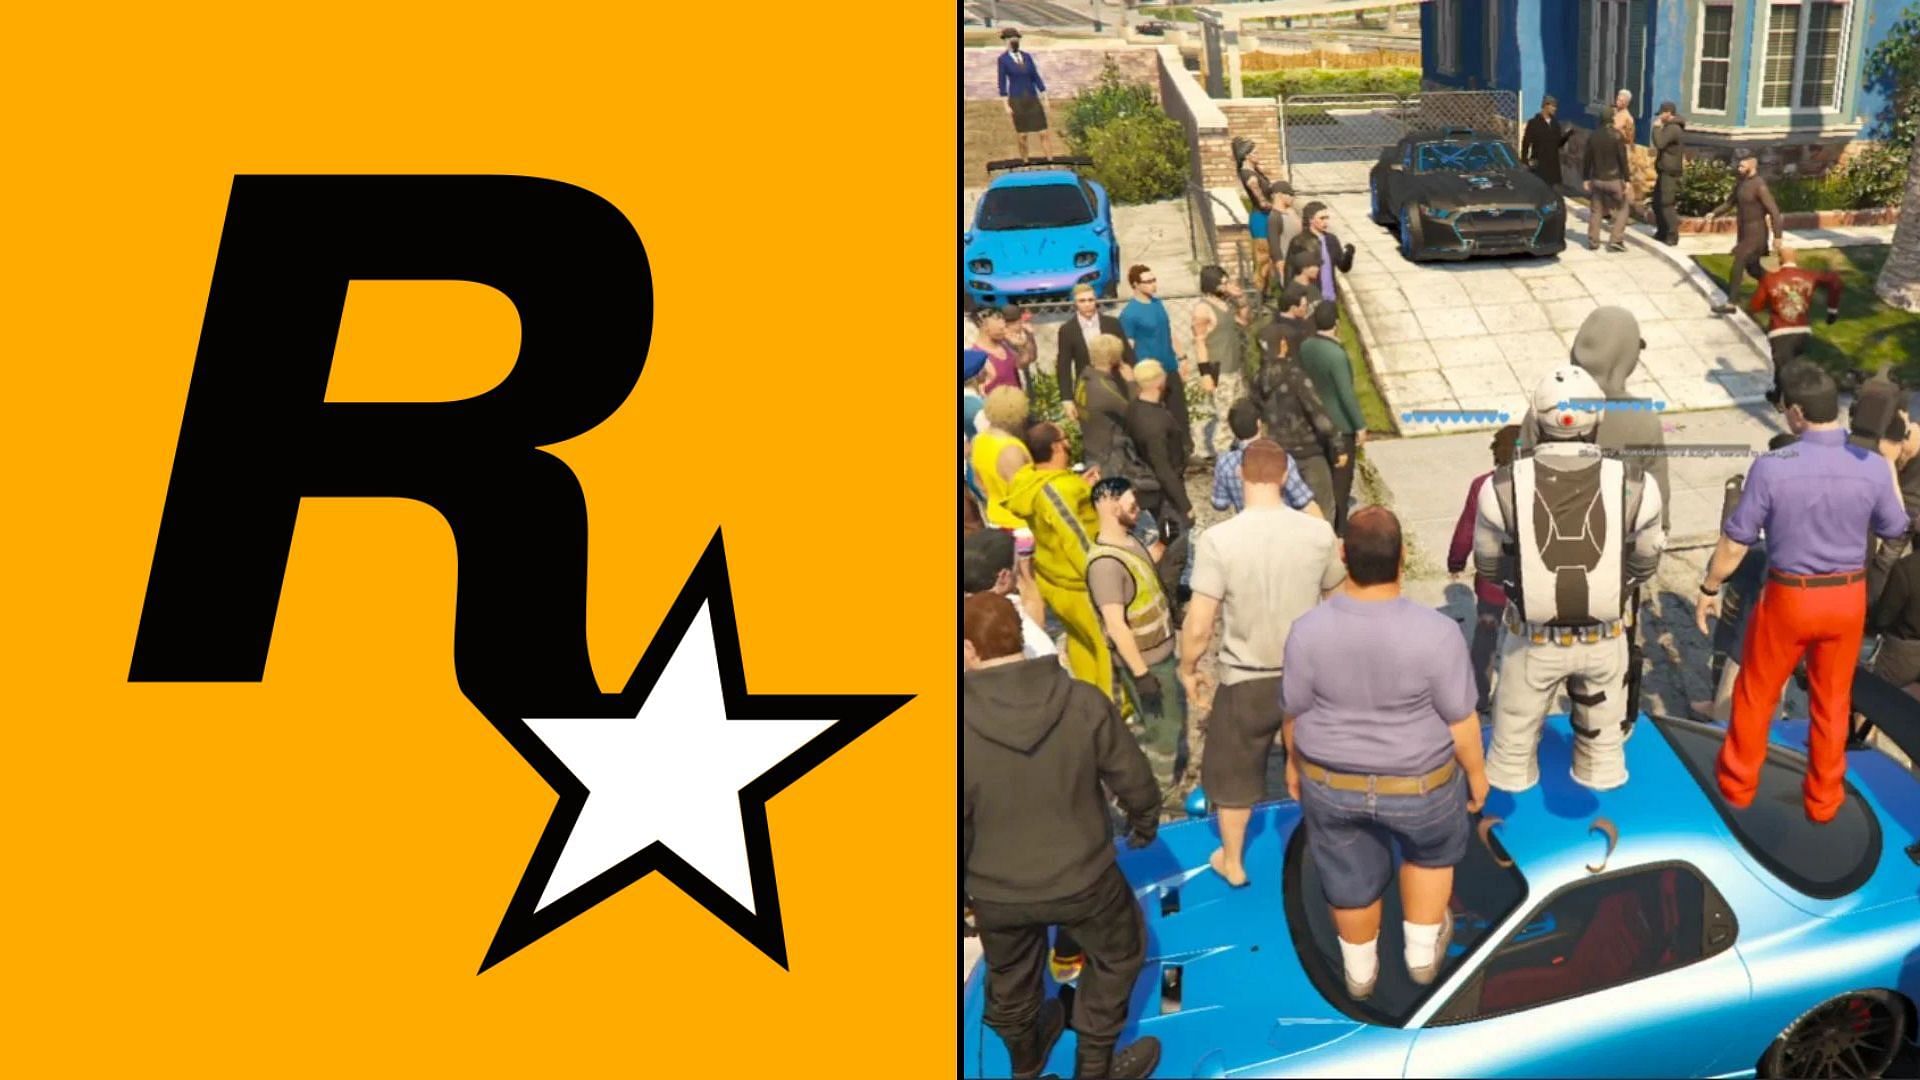 Rockstar Games Ban NFTs and Crypto From Third-Party Online Roleplay Servers